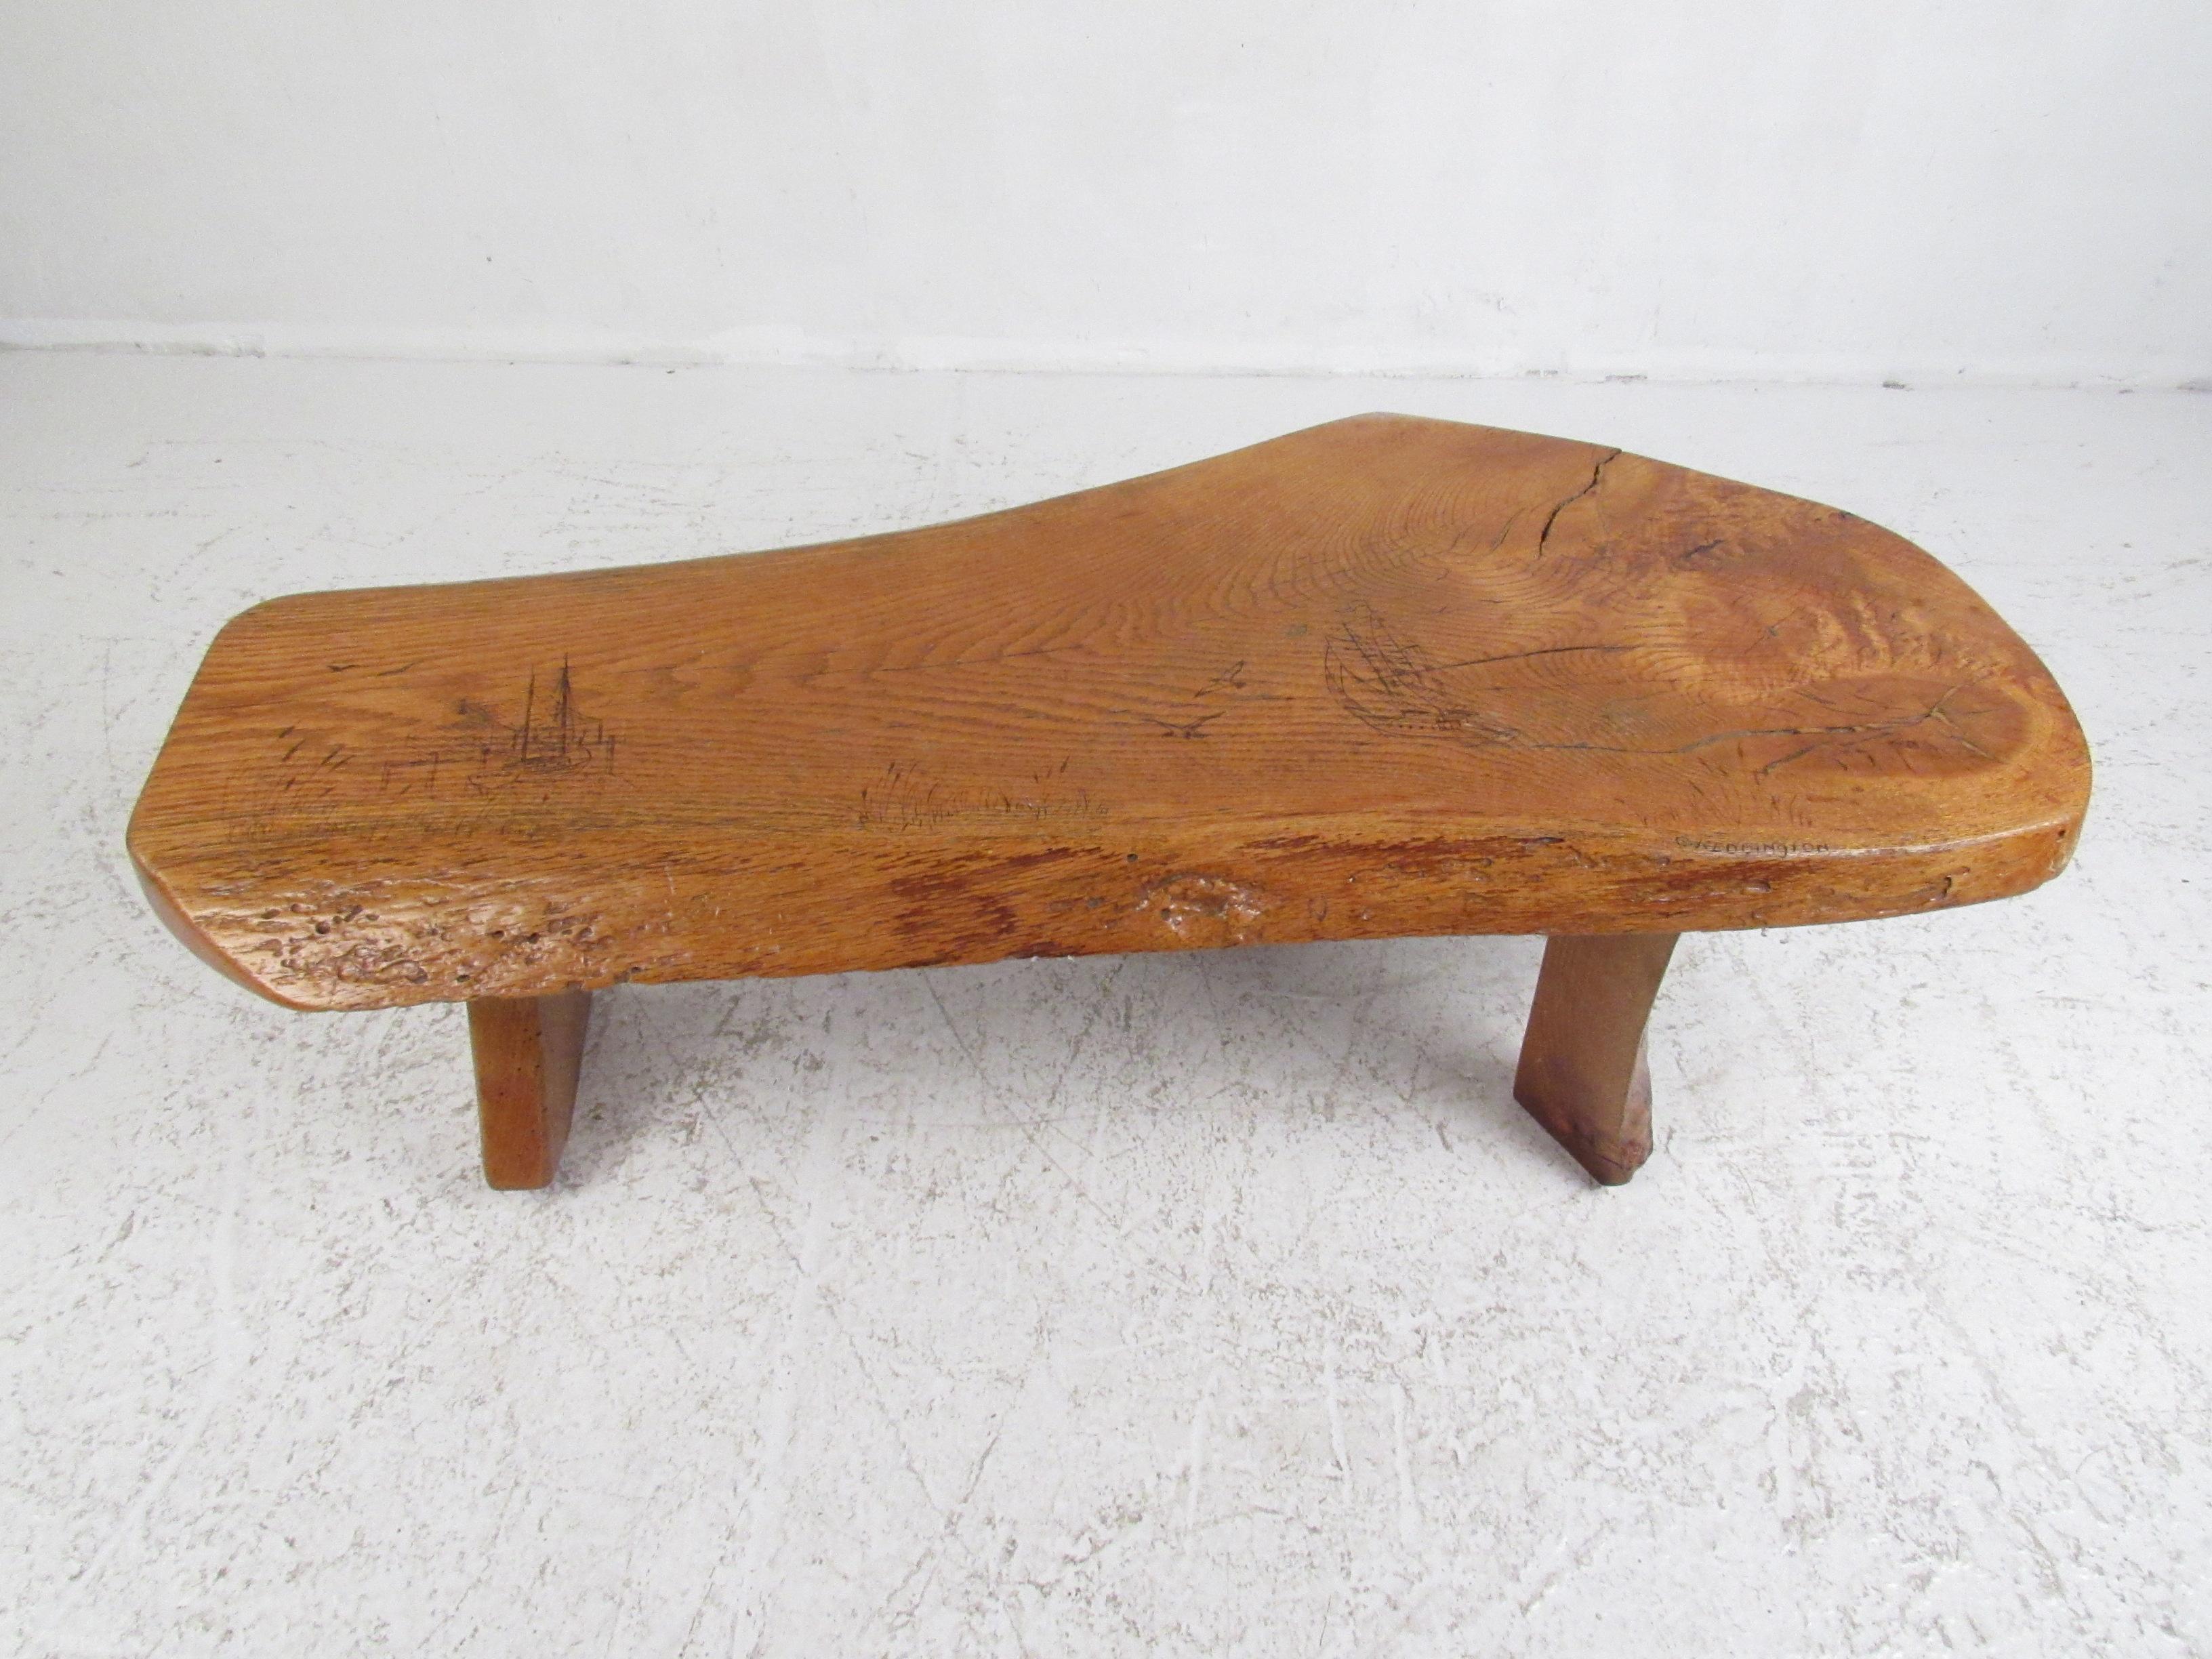 This stunning Mid-Century Modern coffee table features a freeform top and sculpted live edge legs. This unique handmade piece is signed G. Reddington. A small carved sailboat with seagulls and a marina with cattail weeds is carved on the top. The